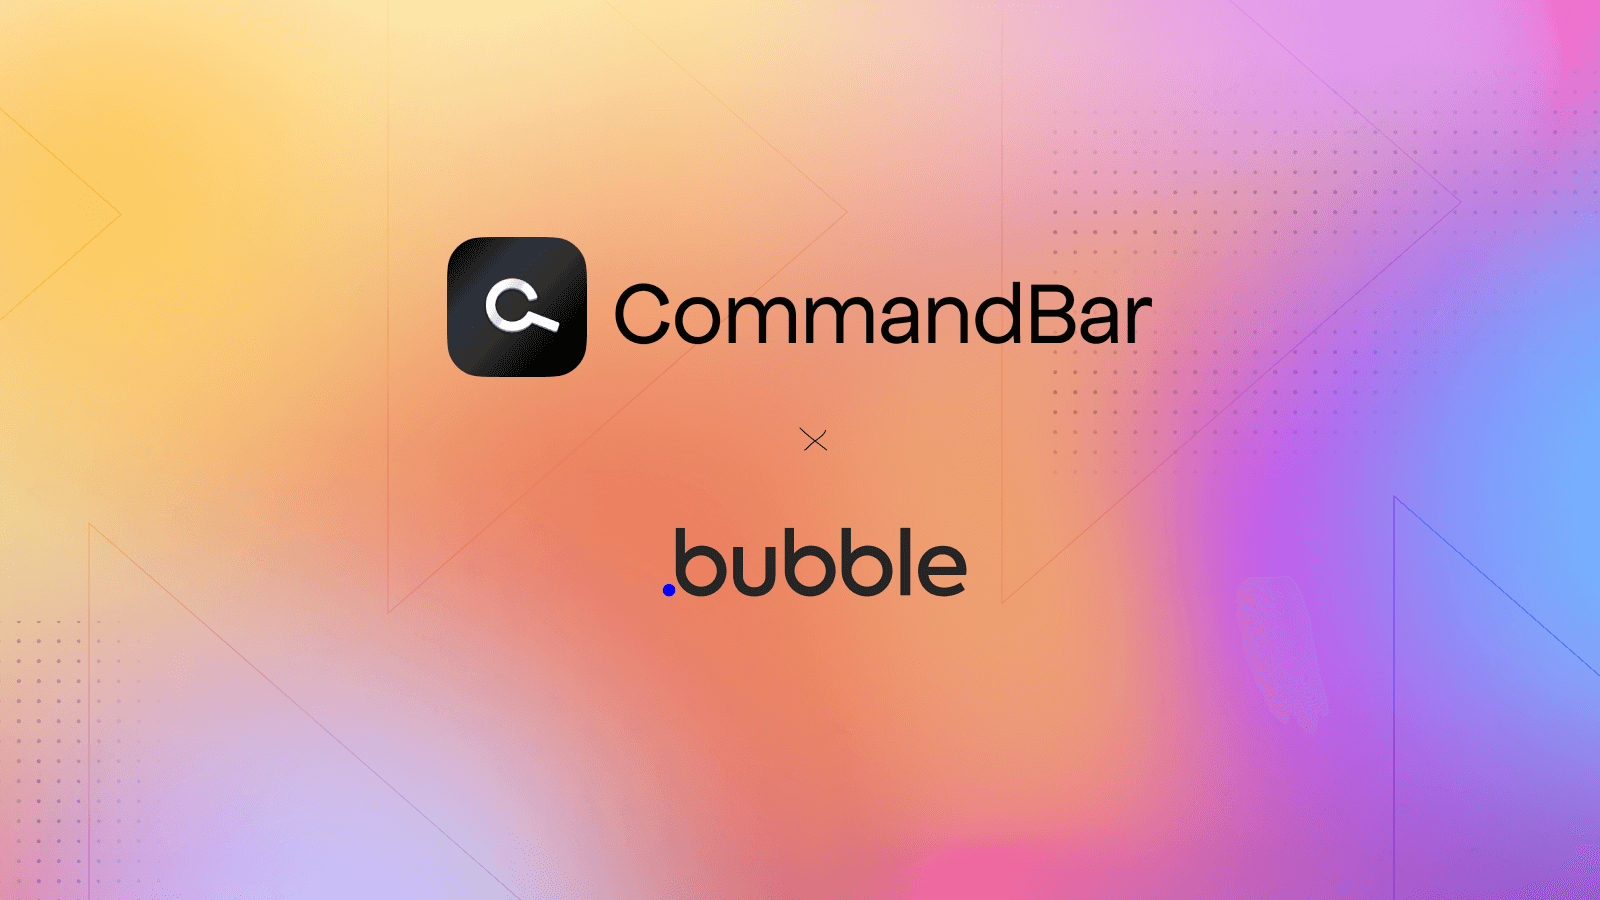 Add pizzazz and guidance to your no-code Bubble app